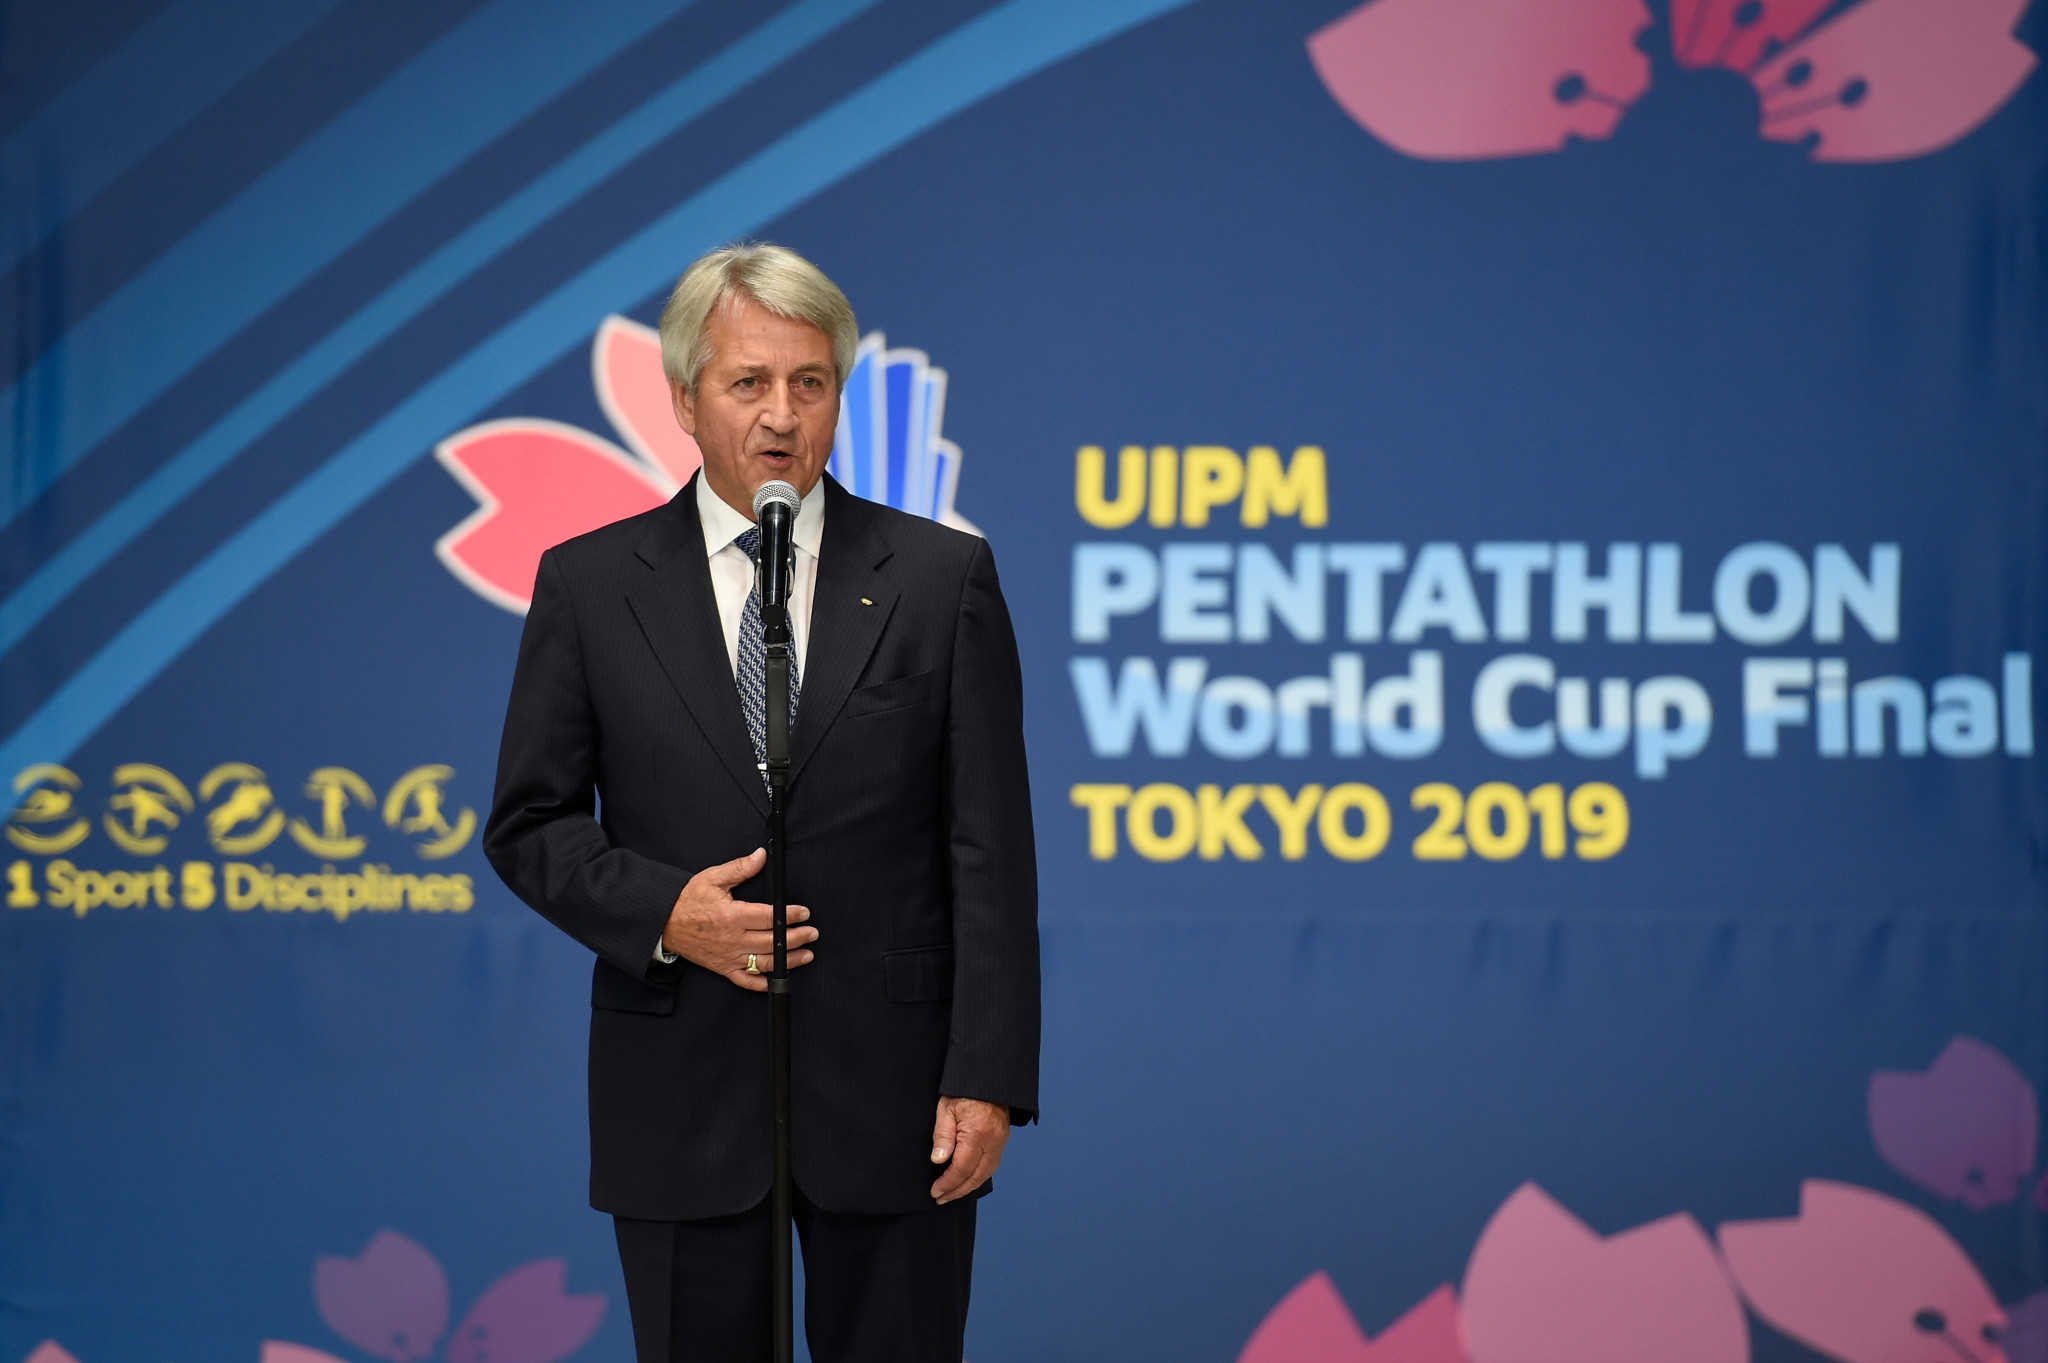 UIPM President Klaus Schormann chairs the Fifth Discipline Working Group which is due to stage a crucial physical meeting at the World Cup in Budapest ©Getty Images